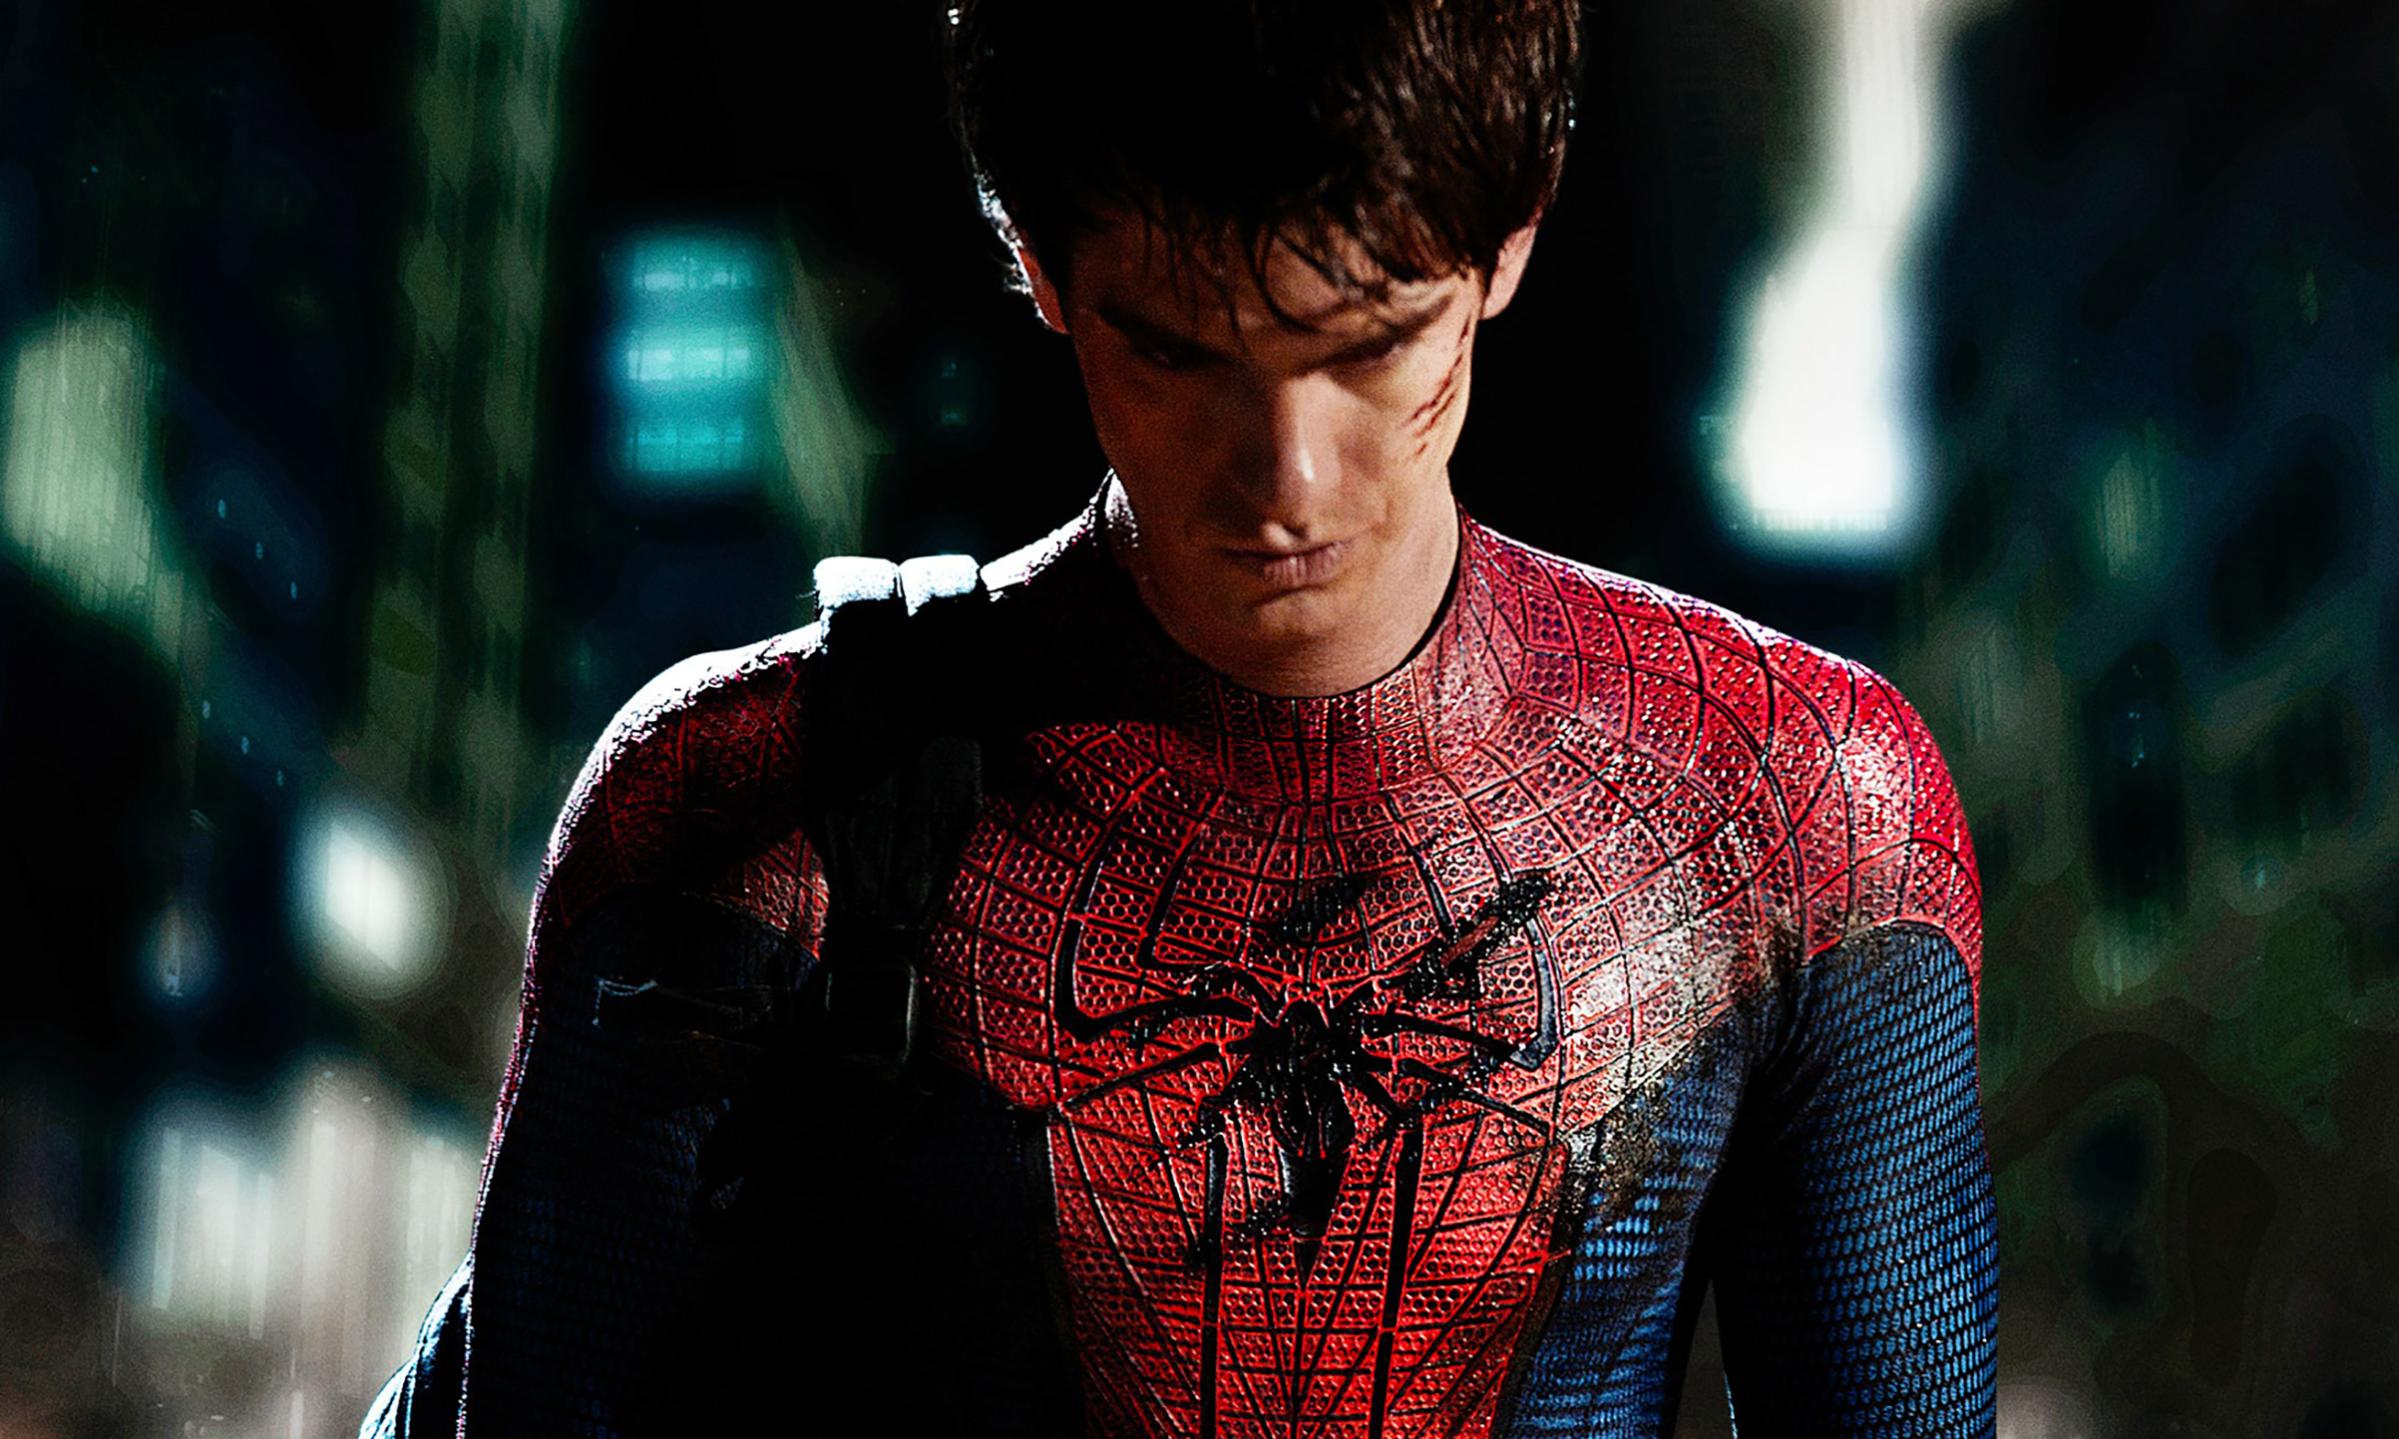 Spidey’s onscreen alter-ego has always been Peter Parker. Sixteen years after the original film, Sony looks to modernize the character. From left: Tobey Maguire, Andrew Garfield and Tom Holland.